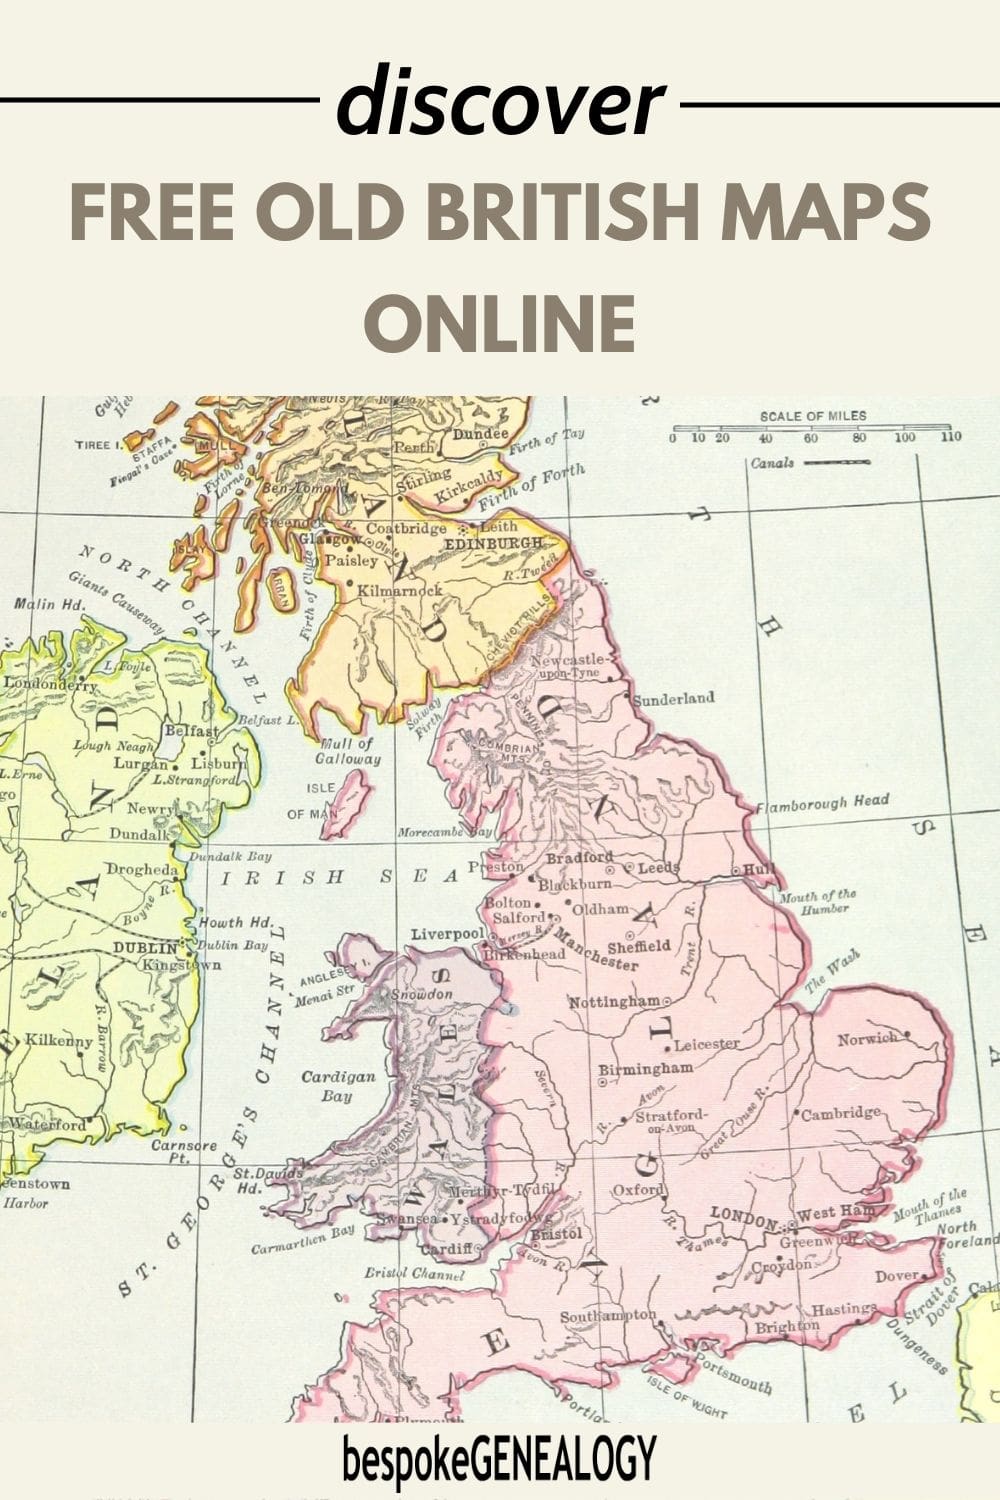 Discover free old British maps online. Image of an old map of the British Isles.